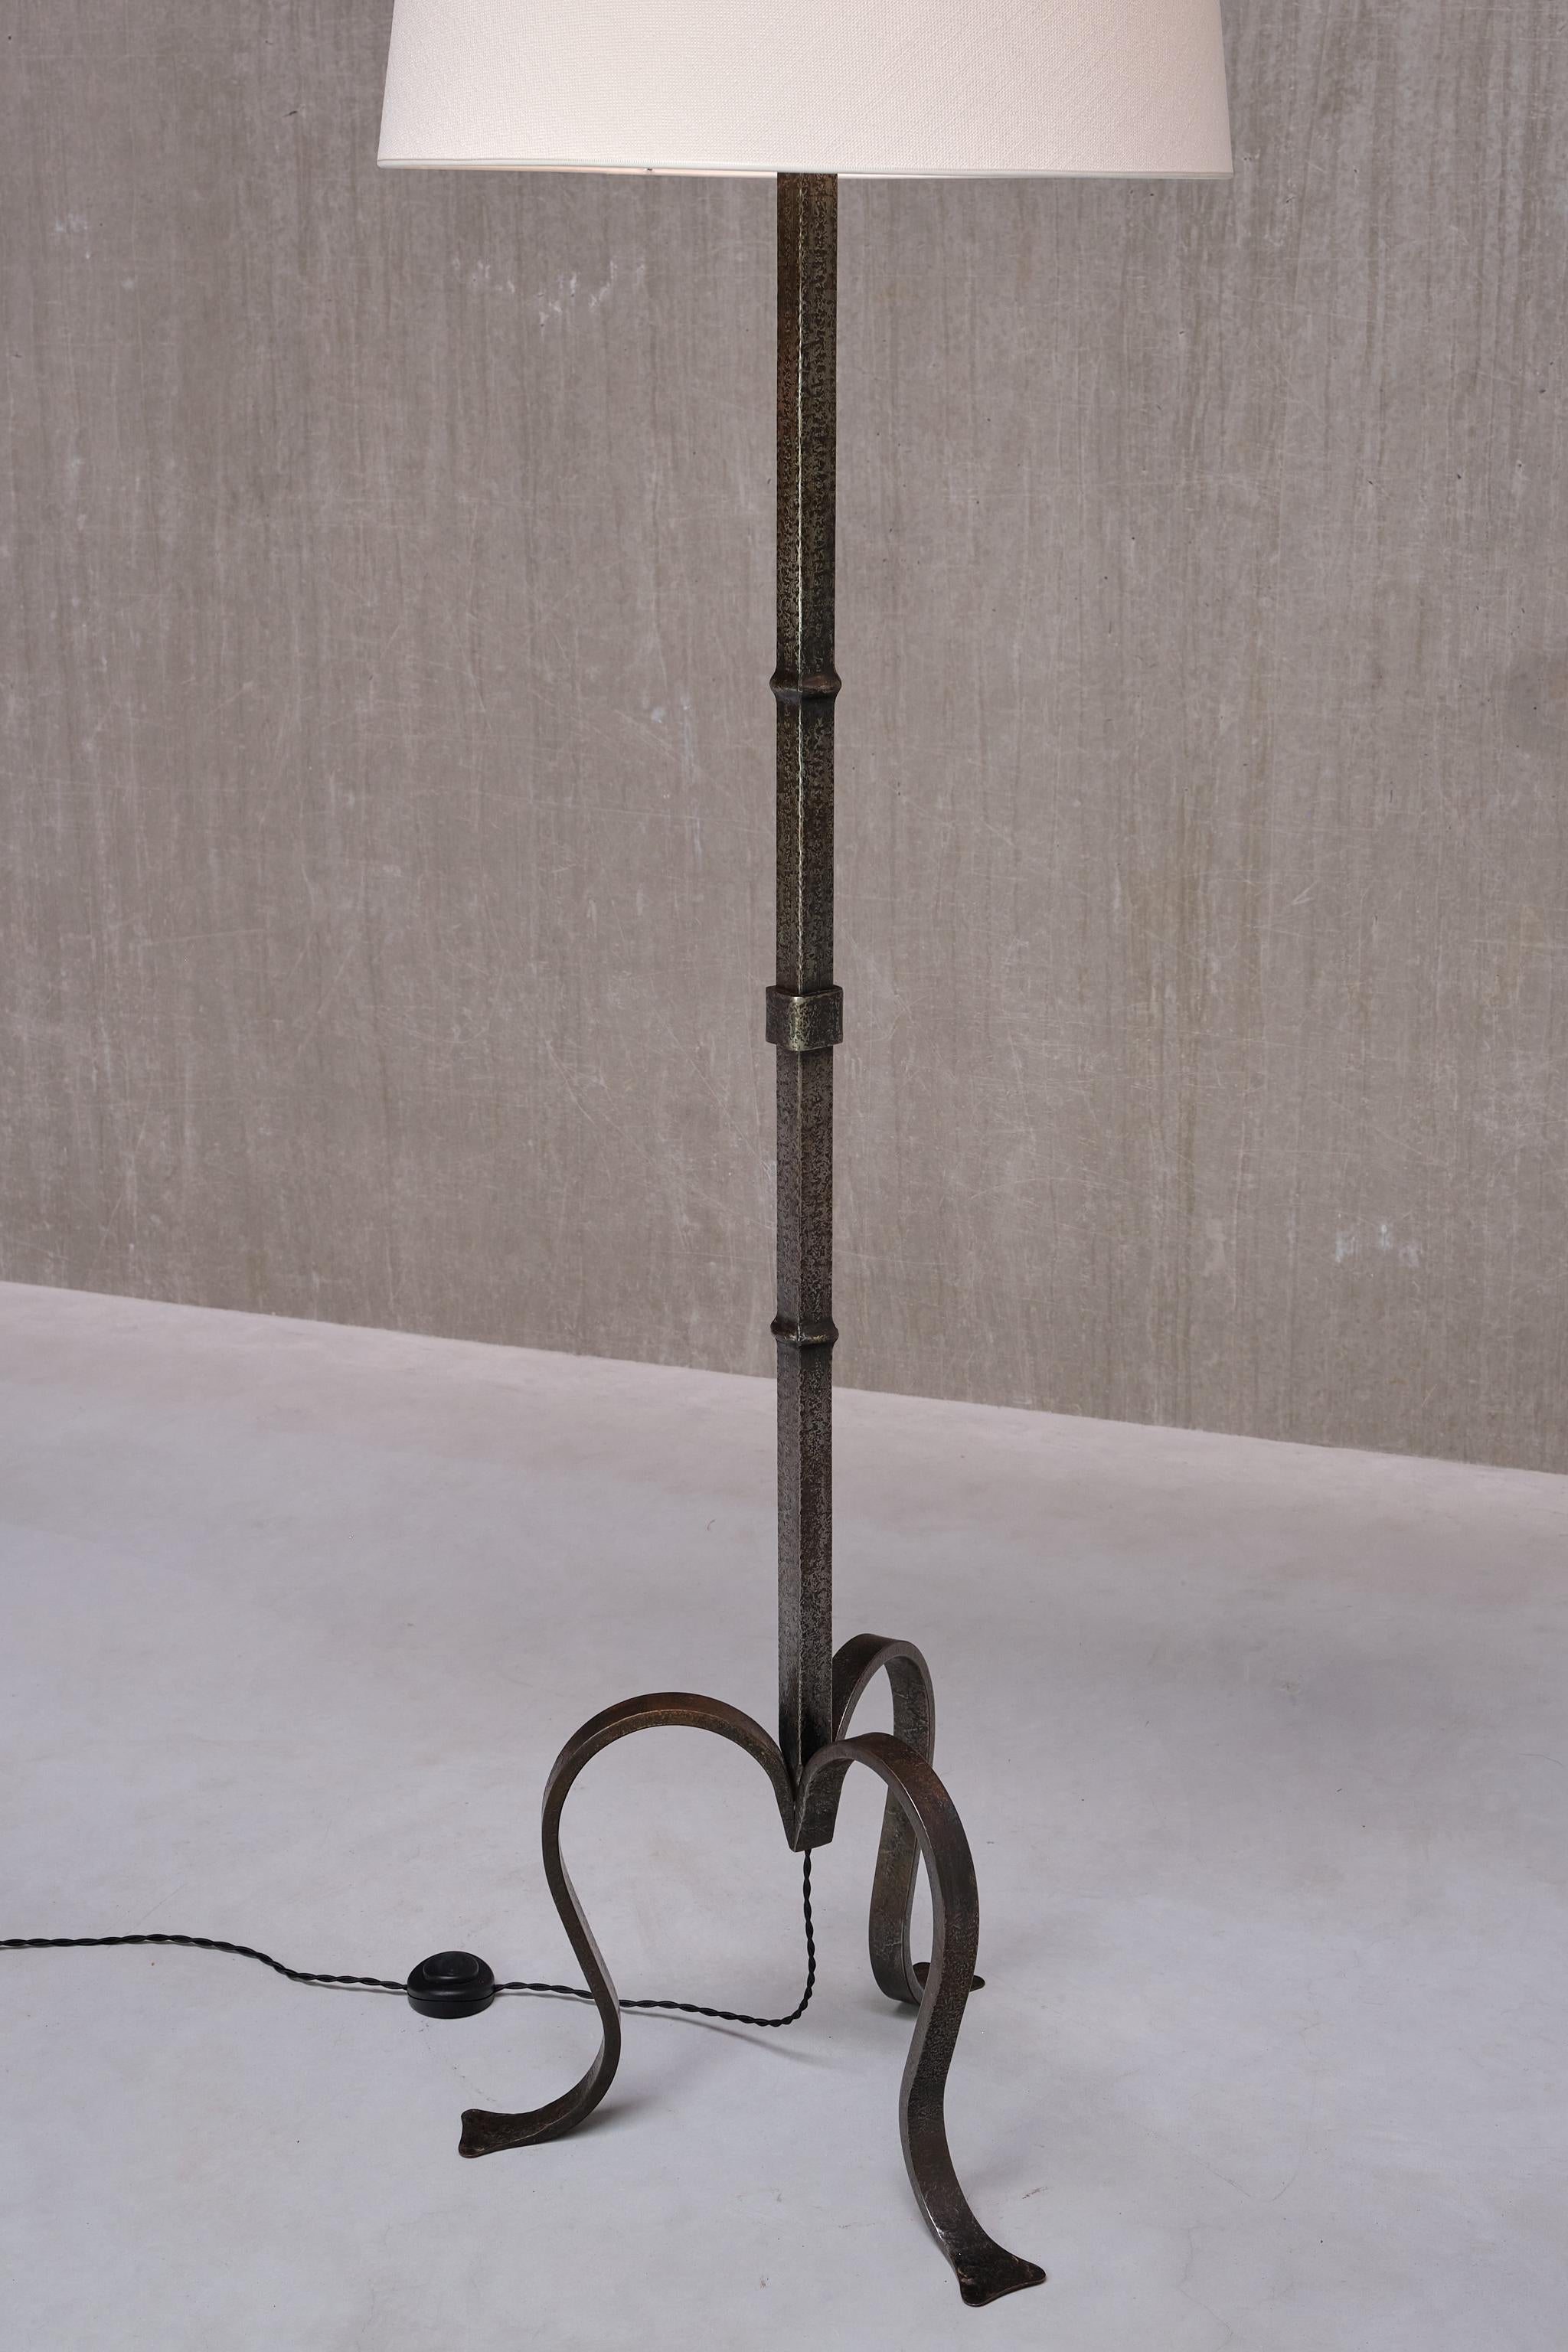 Brutalist Sculptural French Modern Three Legged Floor Lamp in Wrought Iron, 1950s For Sale